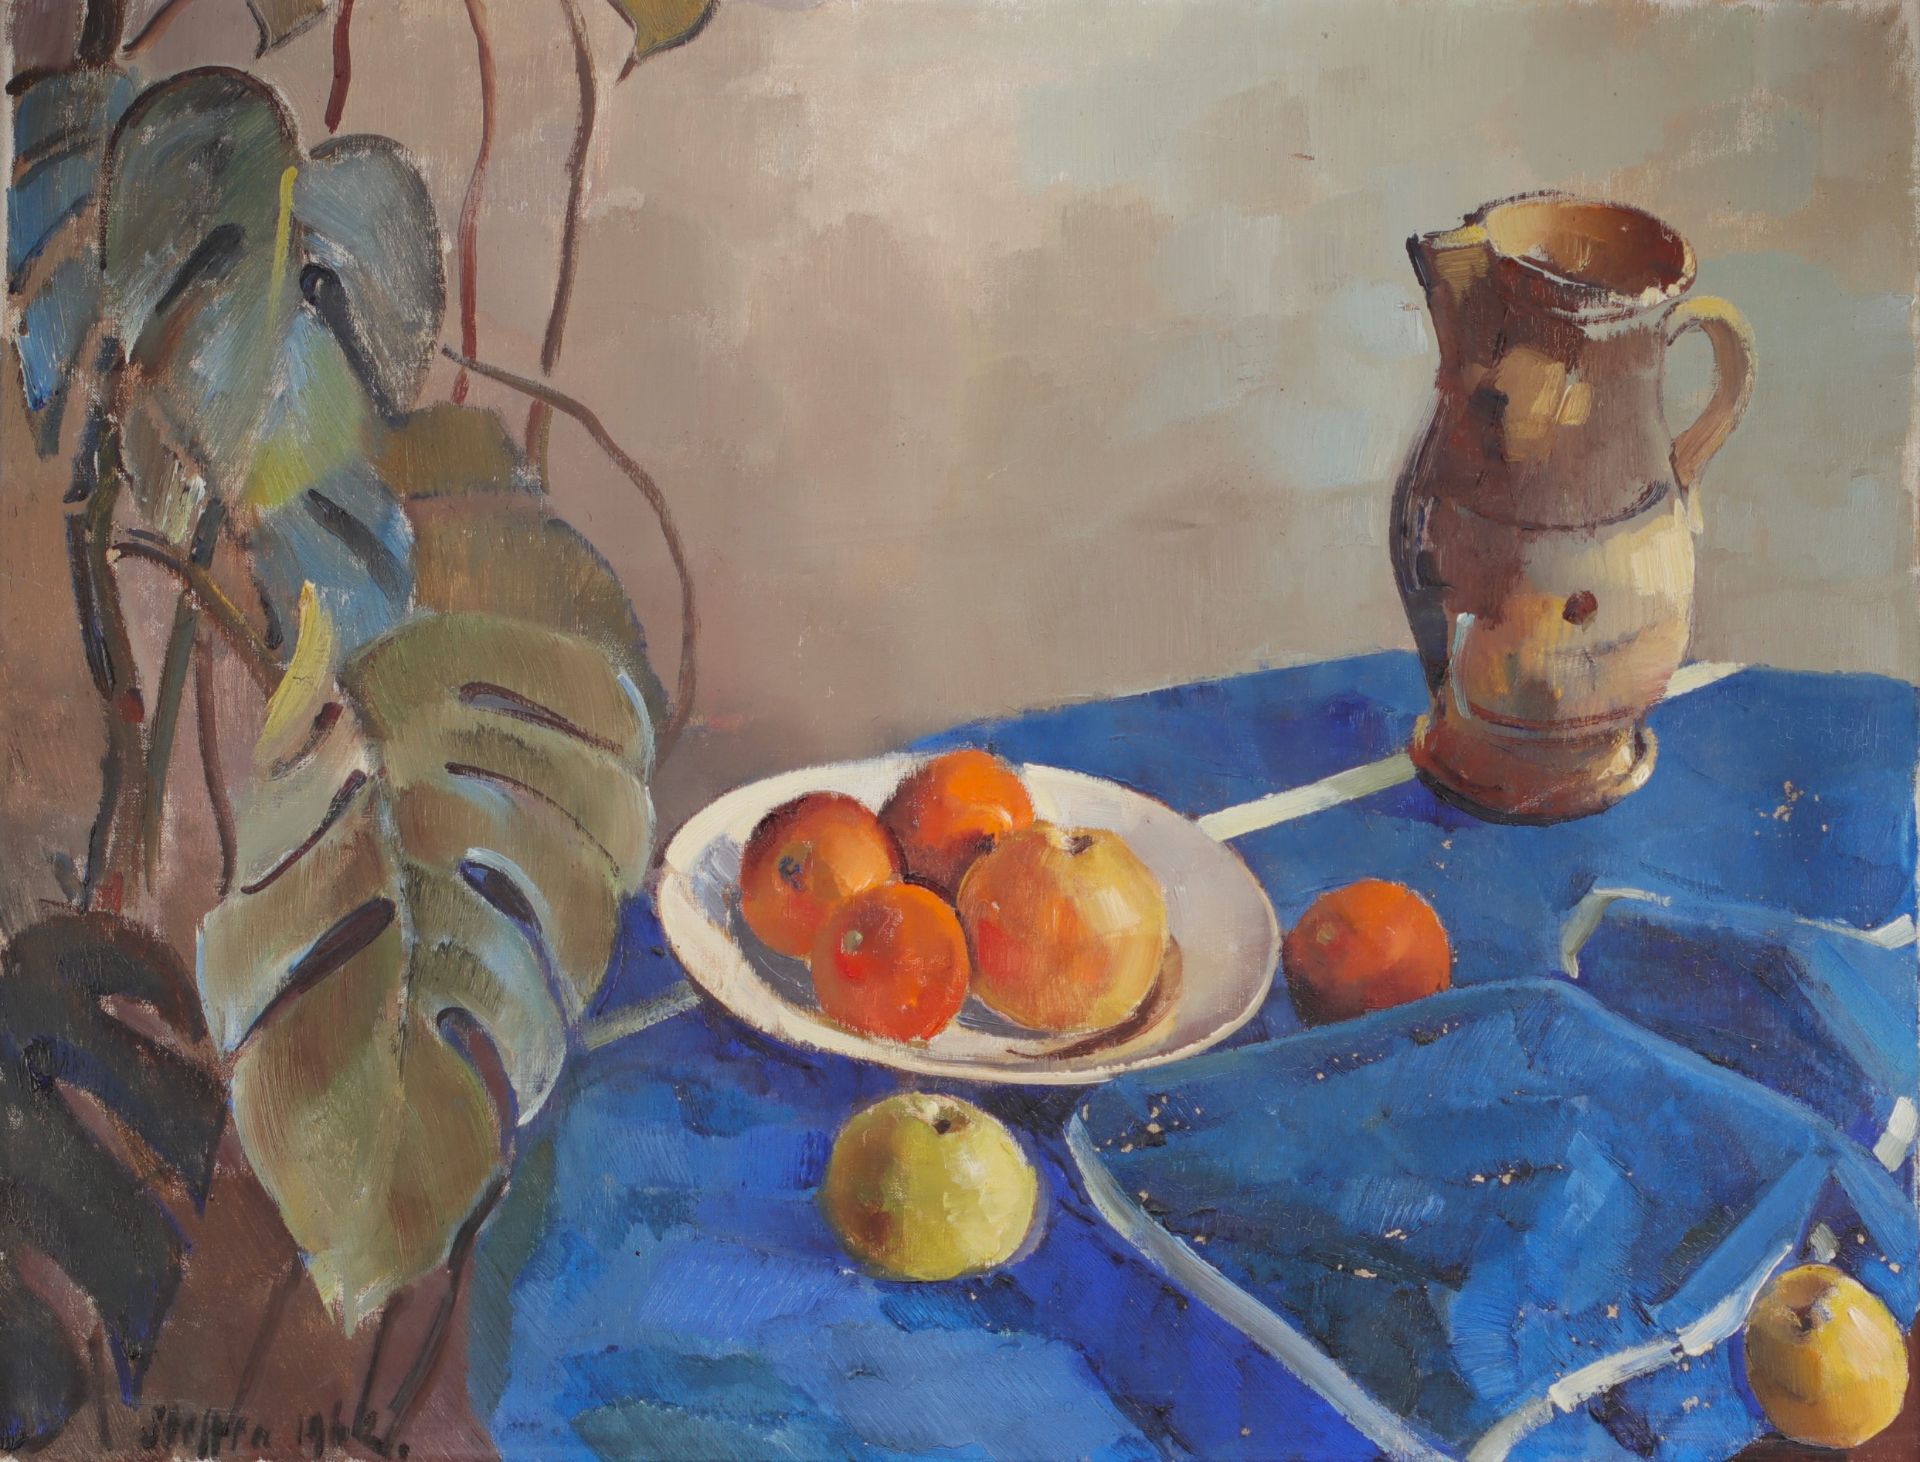 Walter Arnold STEFFEN (1924-1982) "Still life with fruits" Oil on canvas, signed and dated 1962.